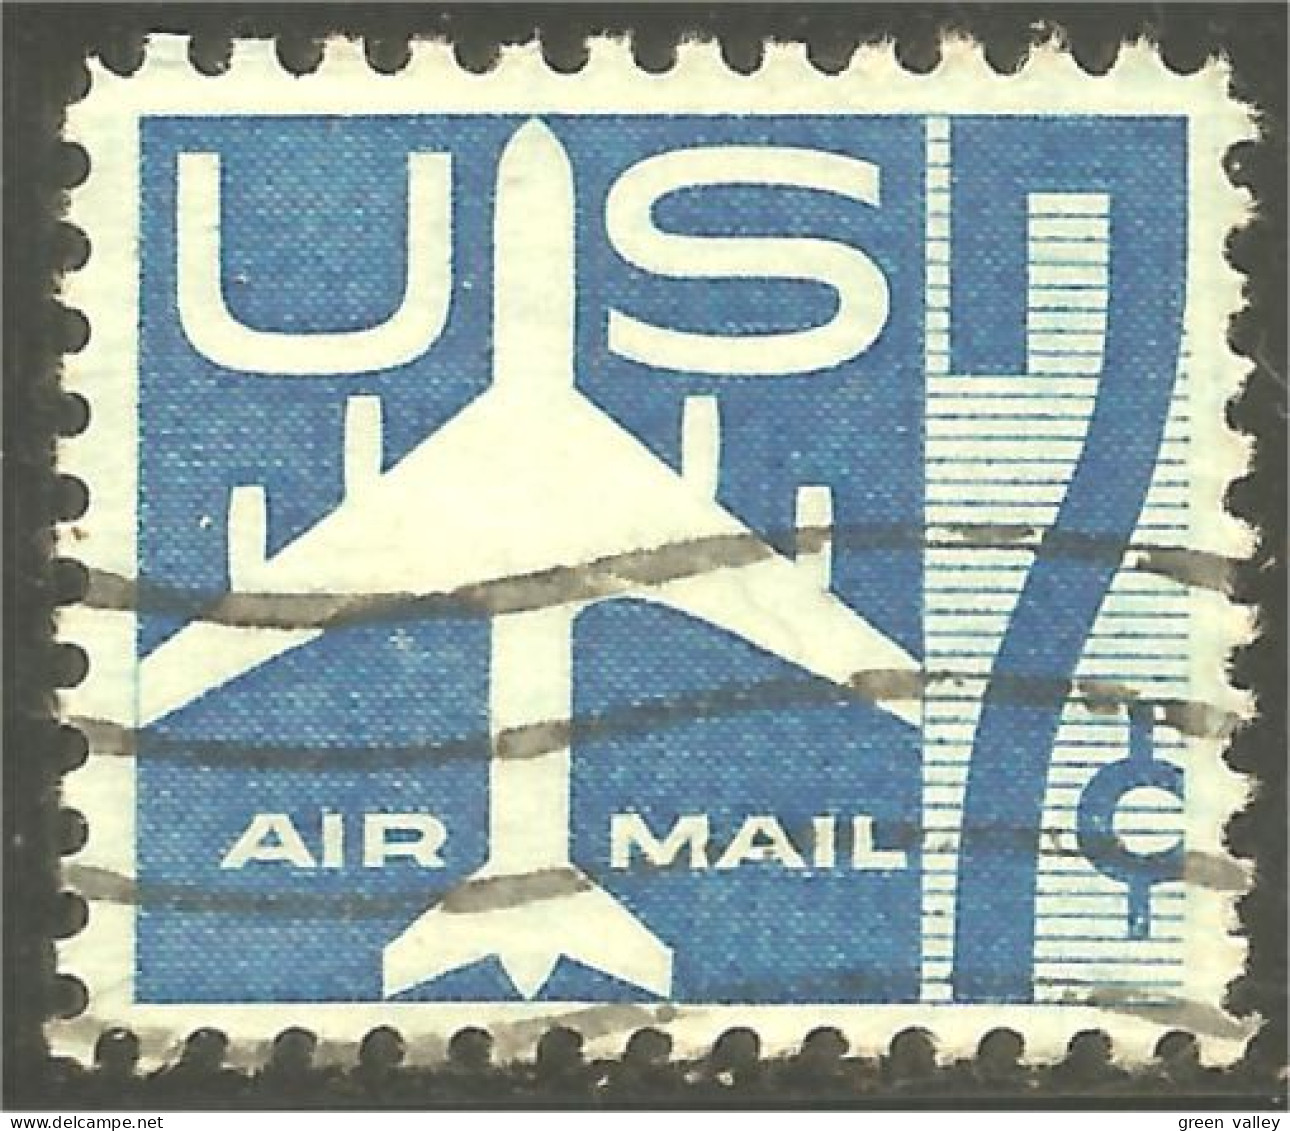 XW01-0445 USA 1958 Airmail Silhouette Avion Airplane Airliner Flugzeug Aereo 7c Blue - Airplanes